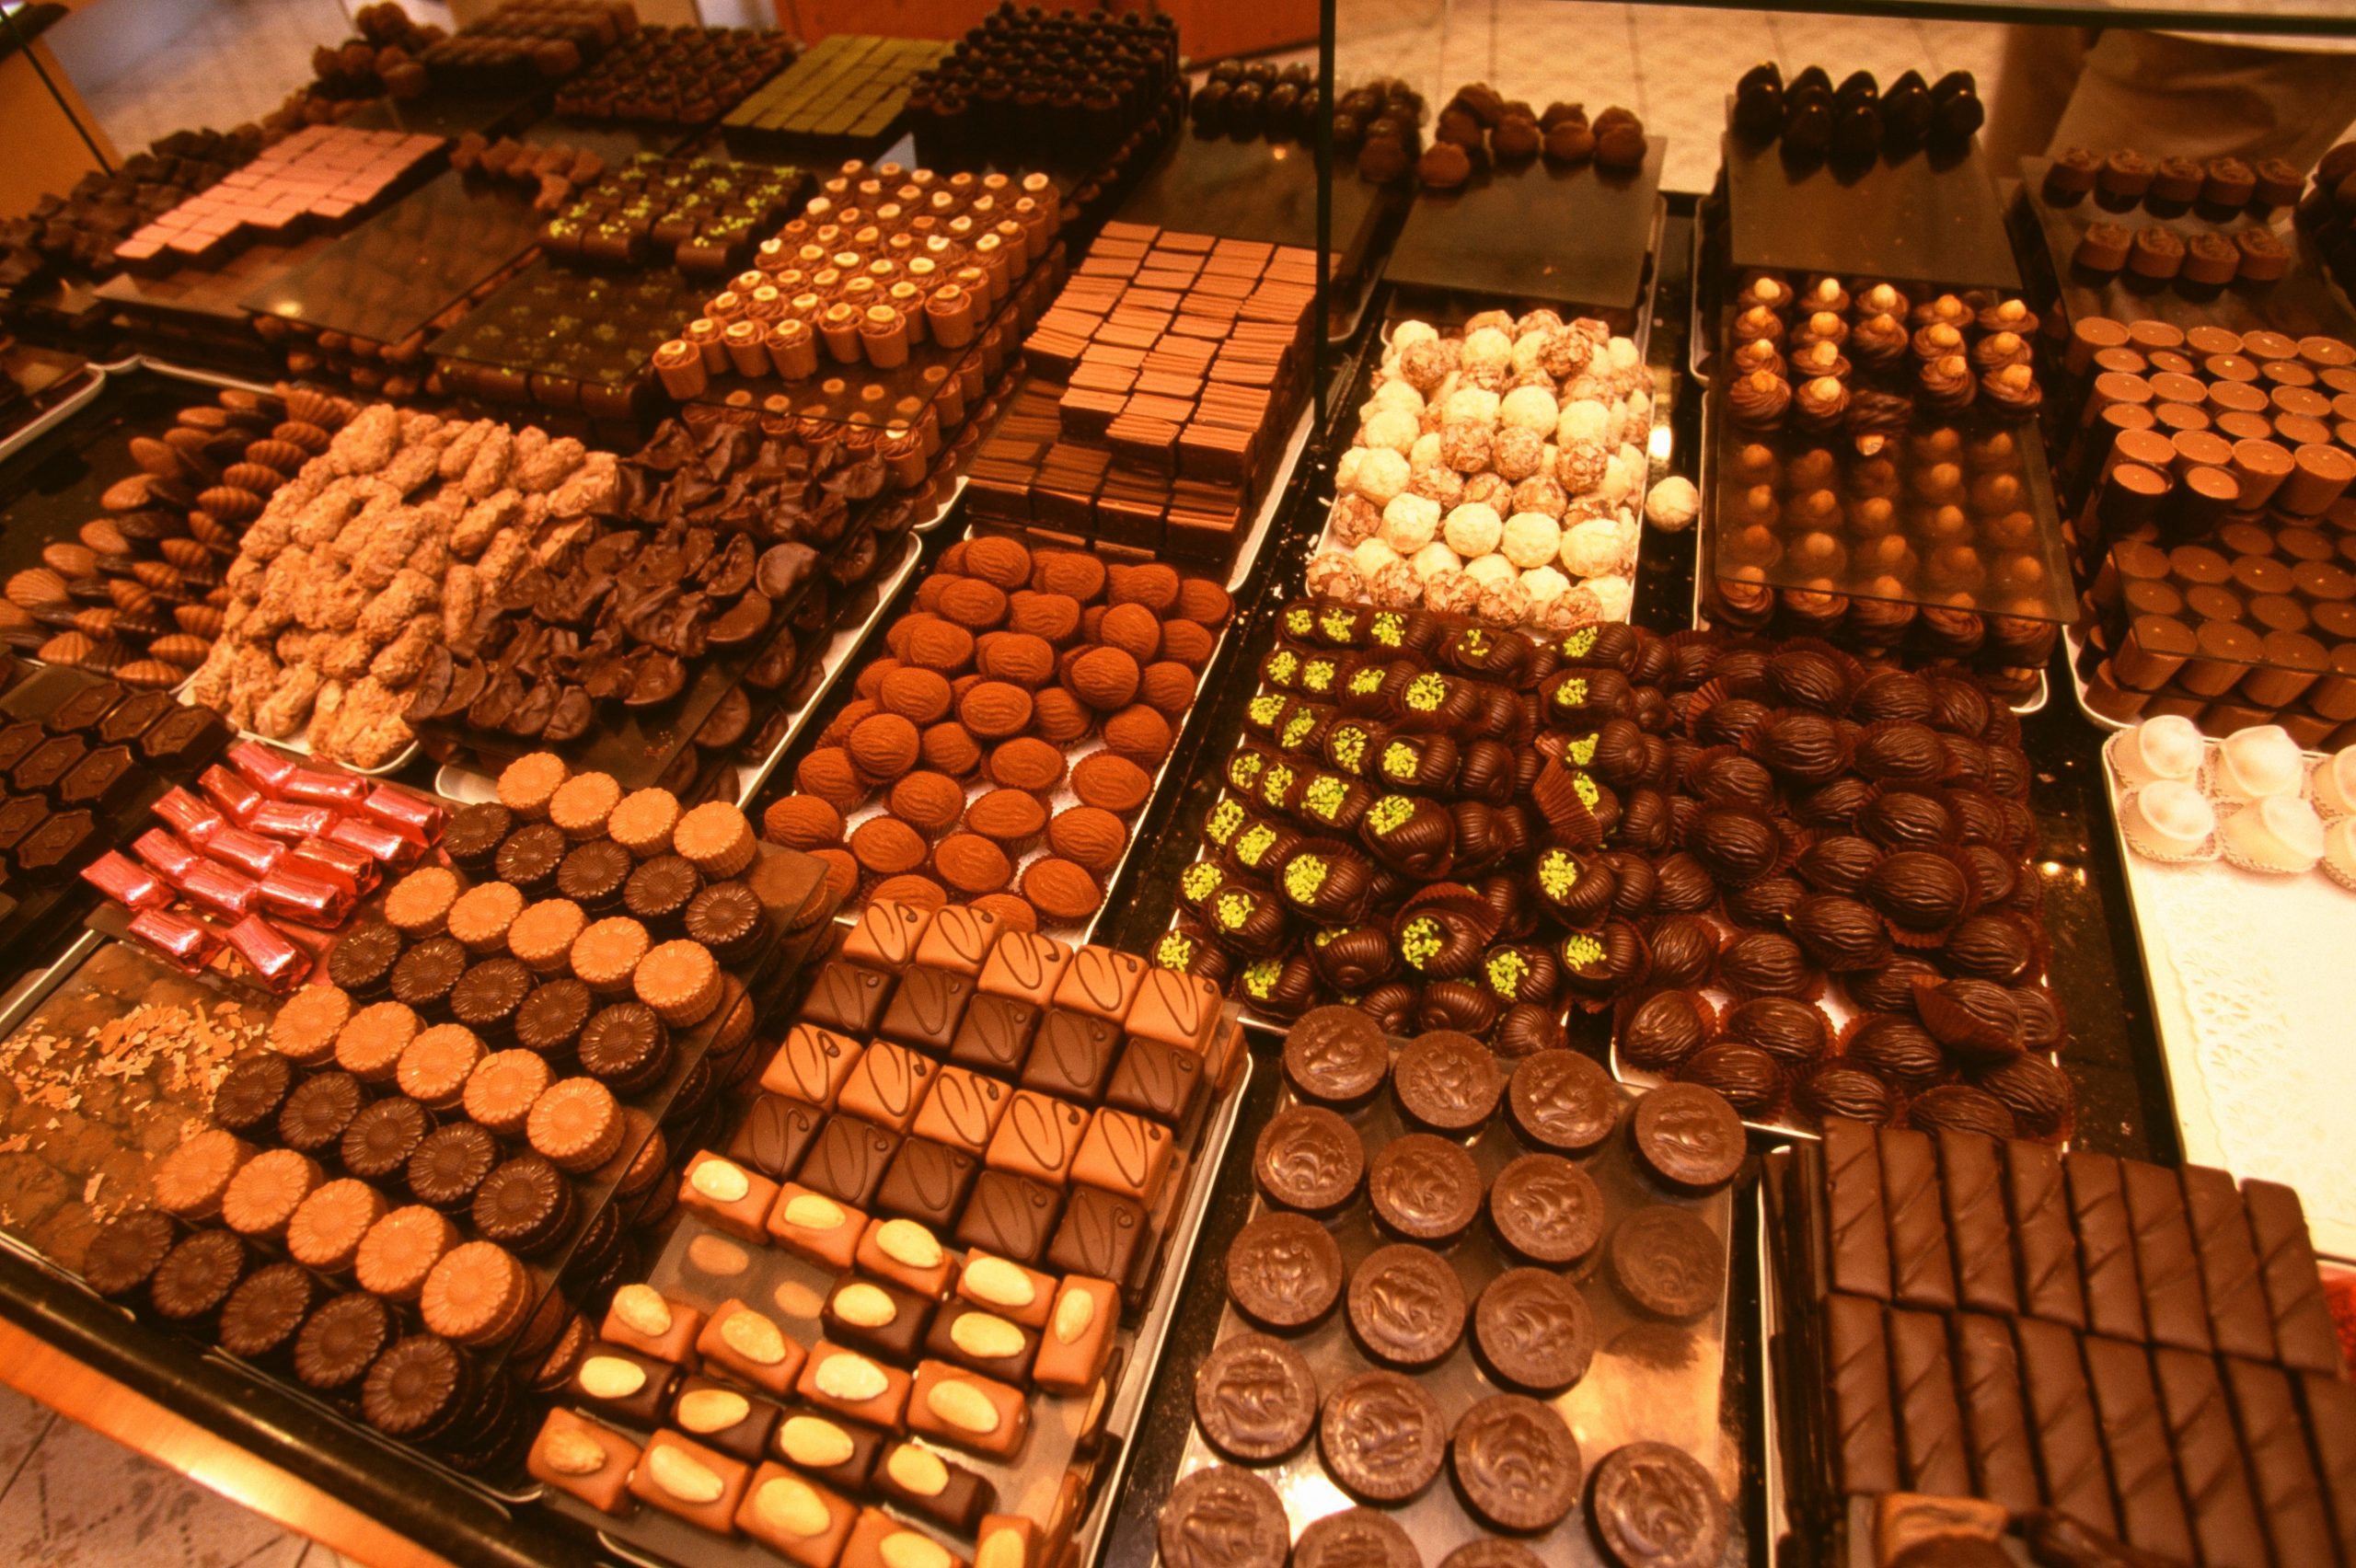 The fourth activity in the 10 best things to do in Belgium is tasting Belgian Chocolate